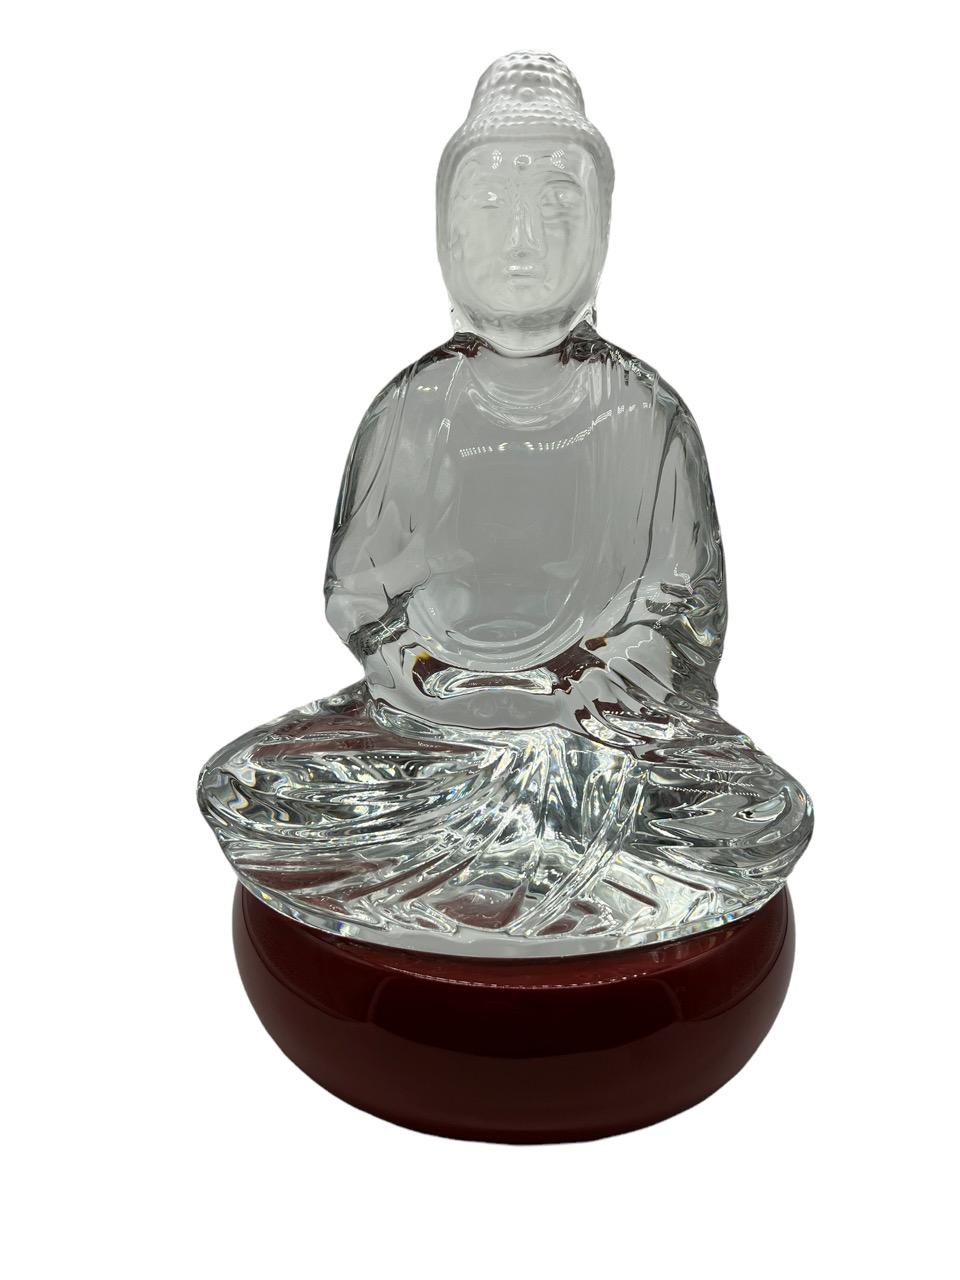 Baccarat clear crystal Buddah figurine designed by Kenzo Takada. This is a limited edition of 50. The statue is signed and numbered as 44. It comes with its original and limited-edition red cinnabar lacquered wood base.
 